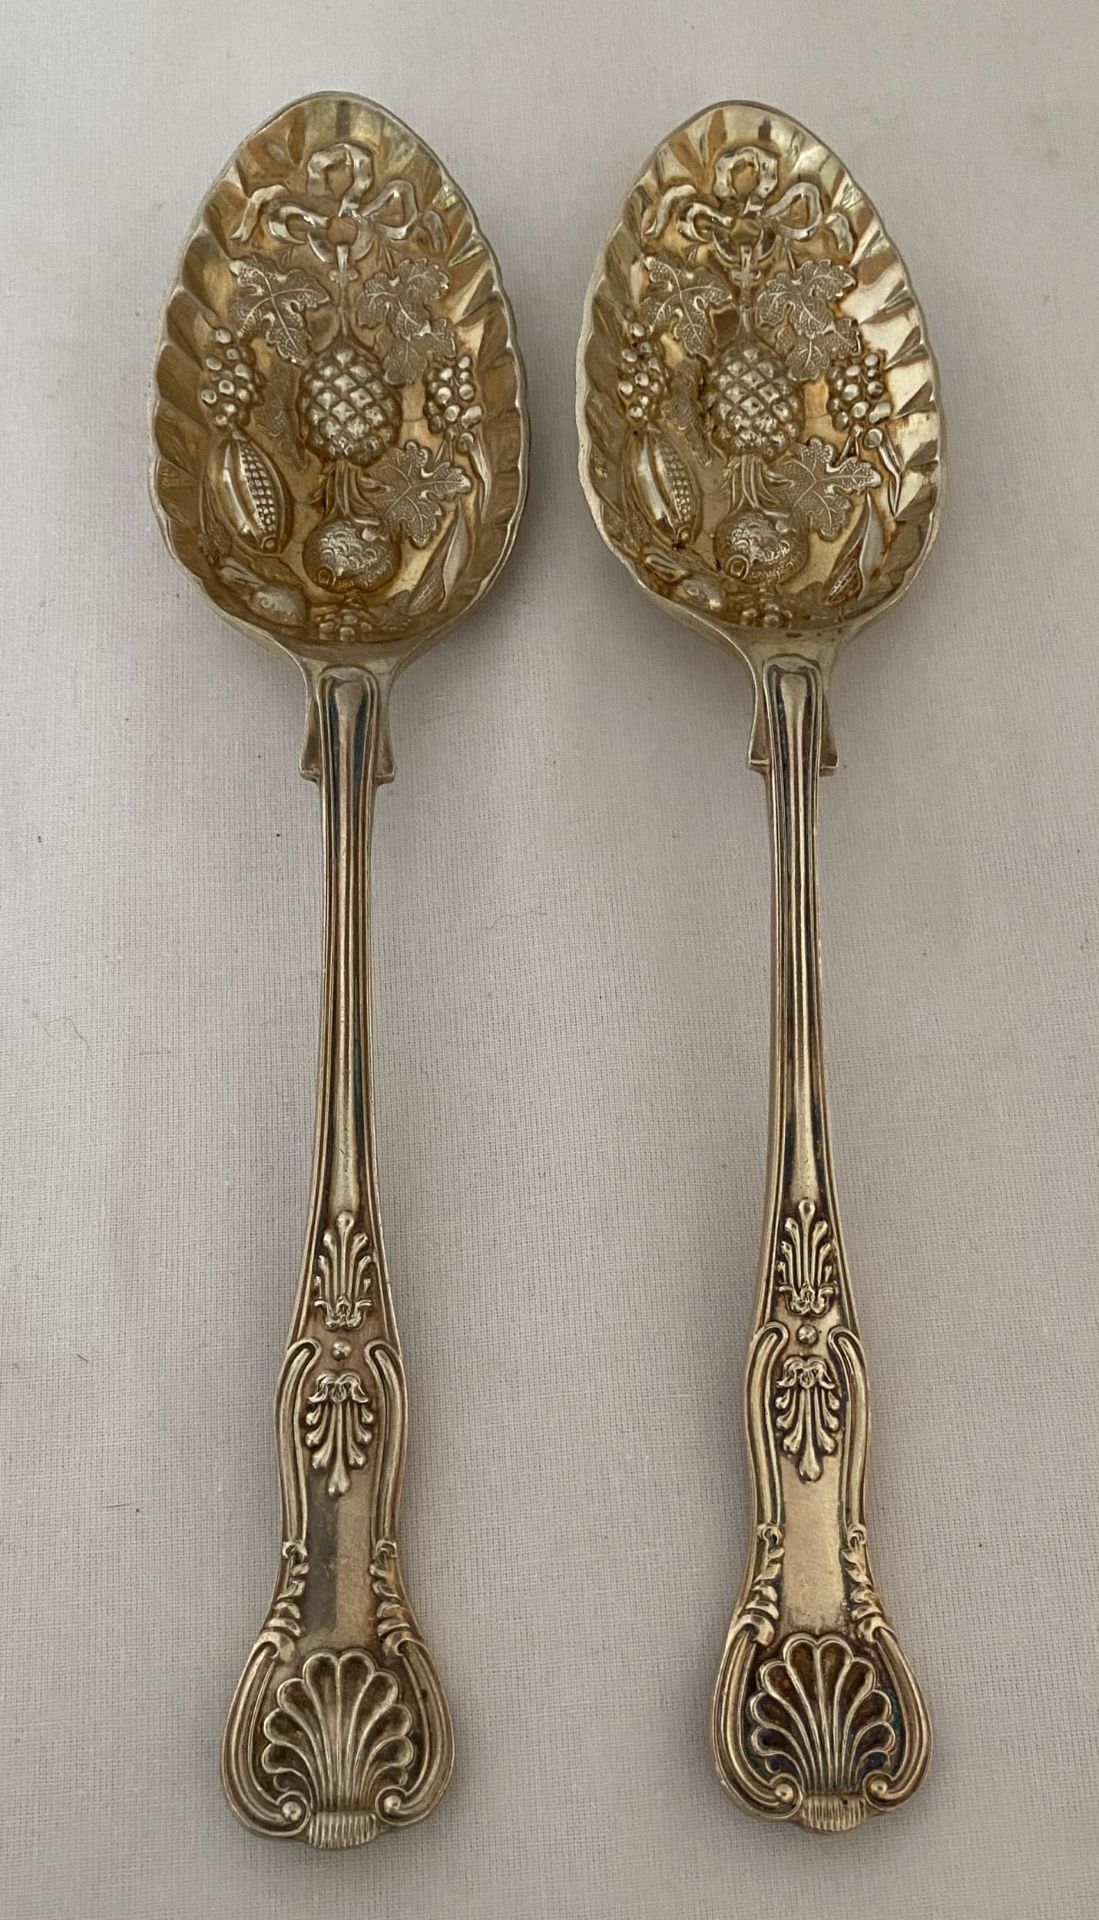 A PAIR OF ELIZABETH II 1972 HALLMARKED SHEFFIELD SILVER BERRY SPOONS, MAKER COOPER BROTHERS & SONS